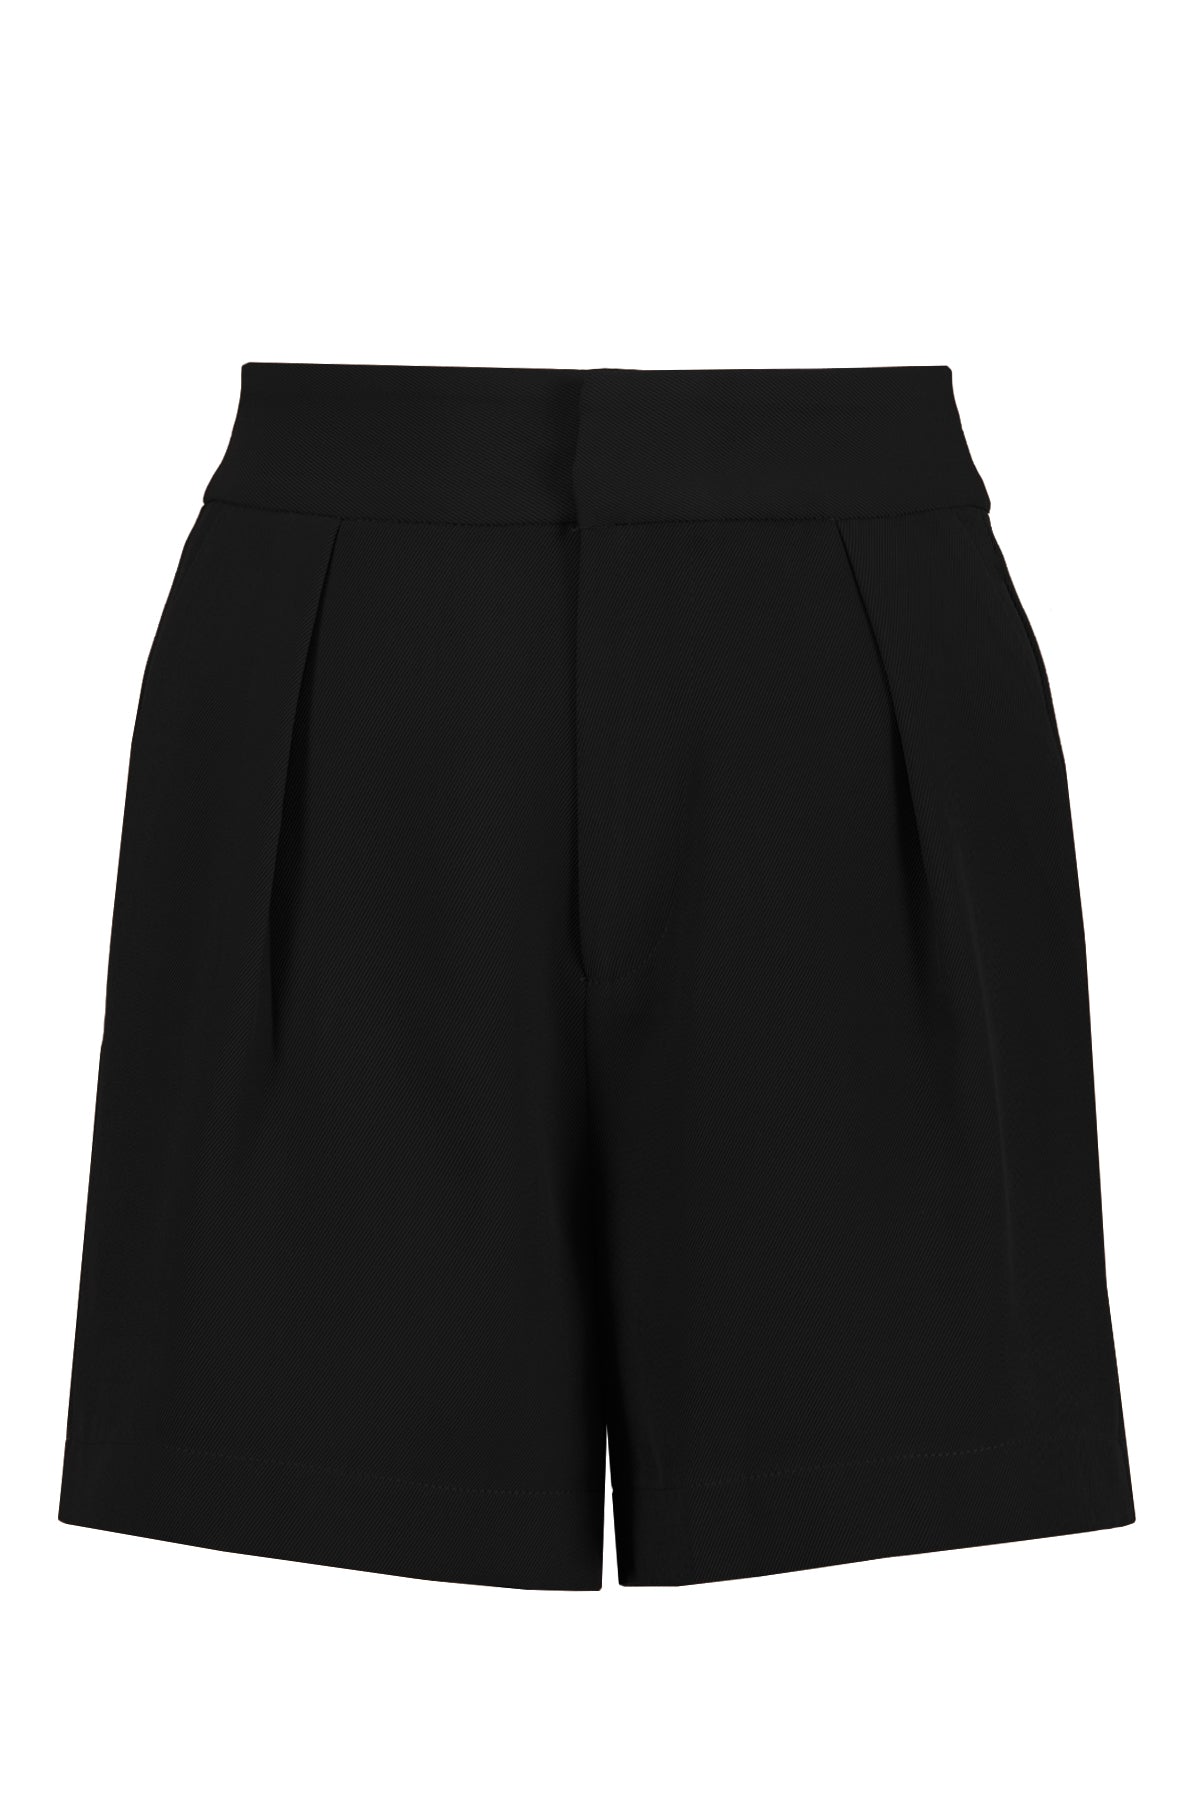 long black shorts with pleat